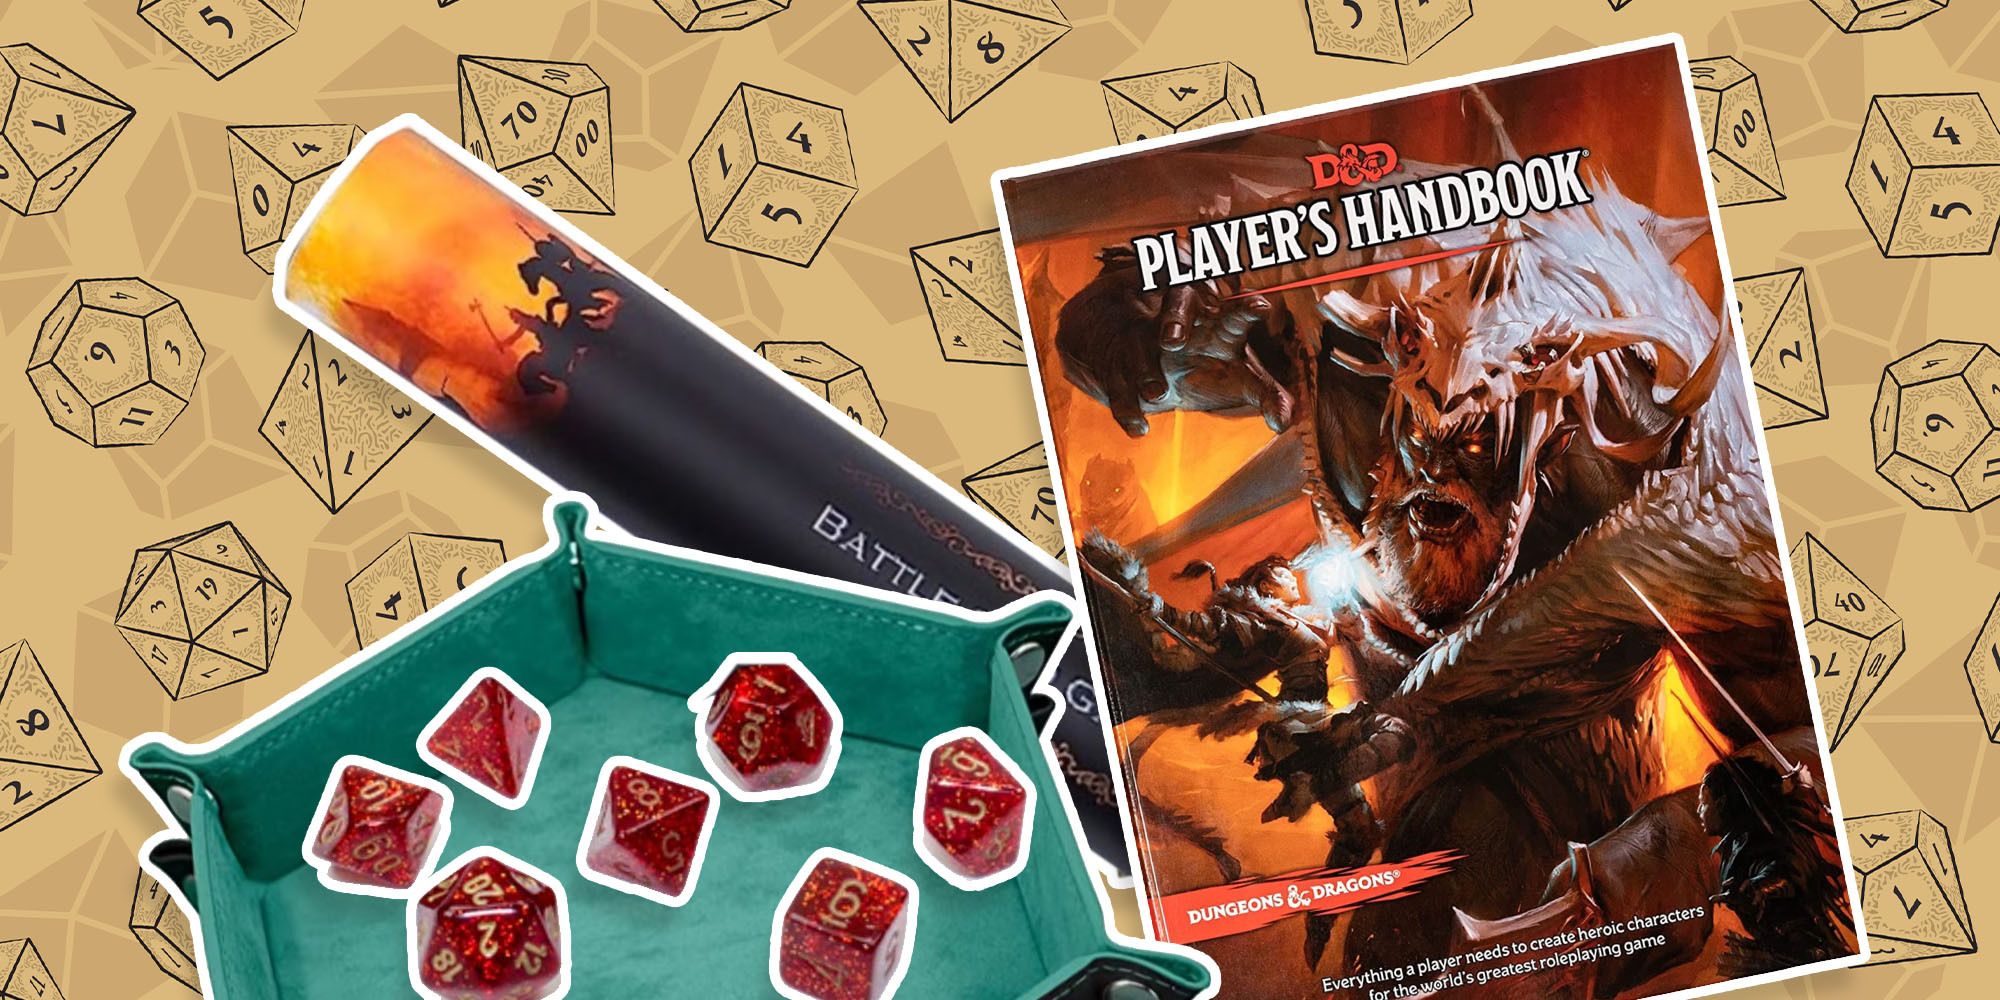 Dice tray, dice, battle mat and Player's Handbook image for d&d